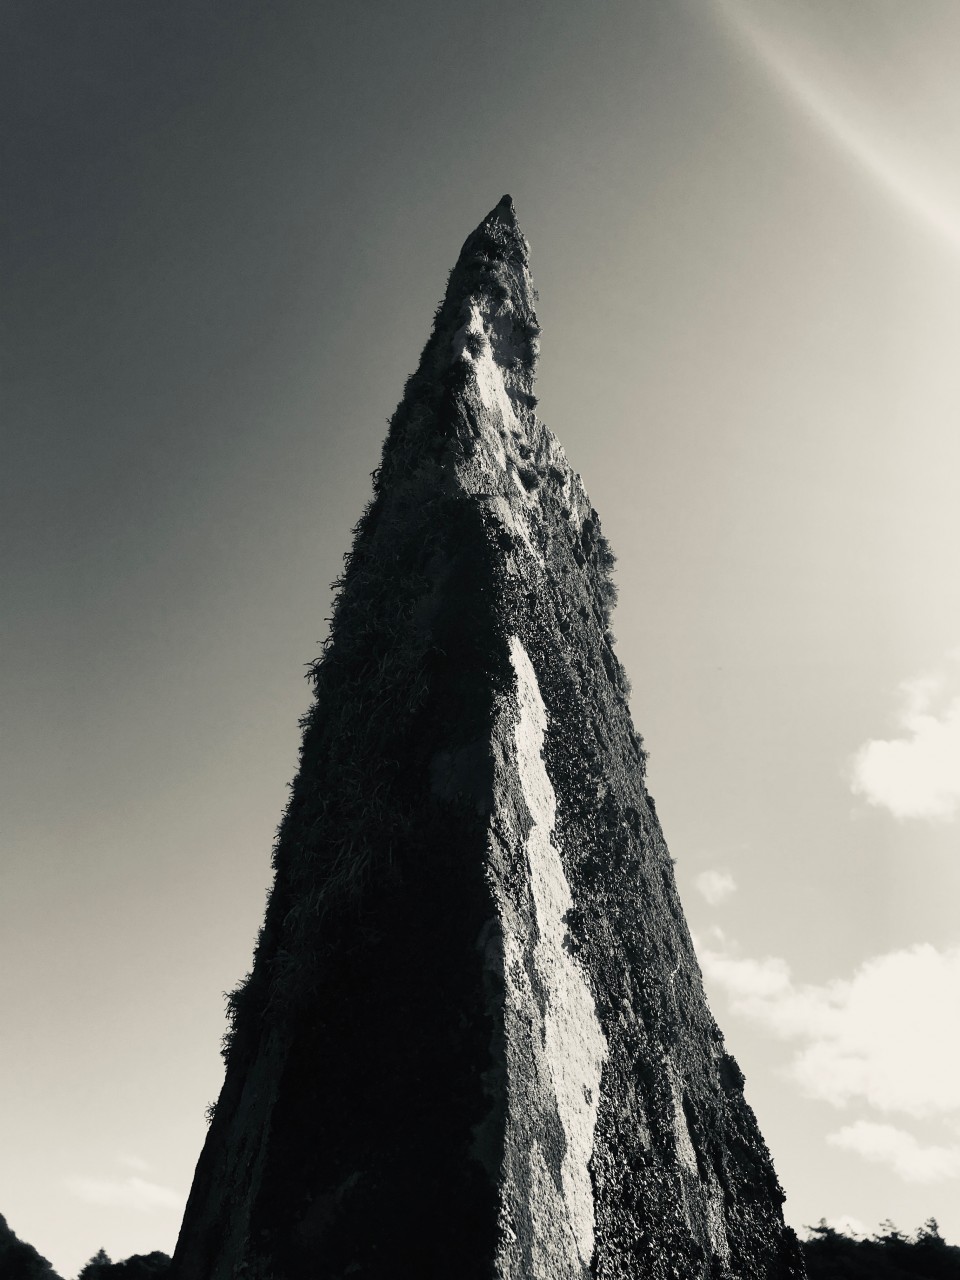 Lochbuie Outlier 1 (Standing Stone / Menhir) by texlahoma